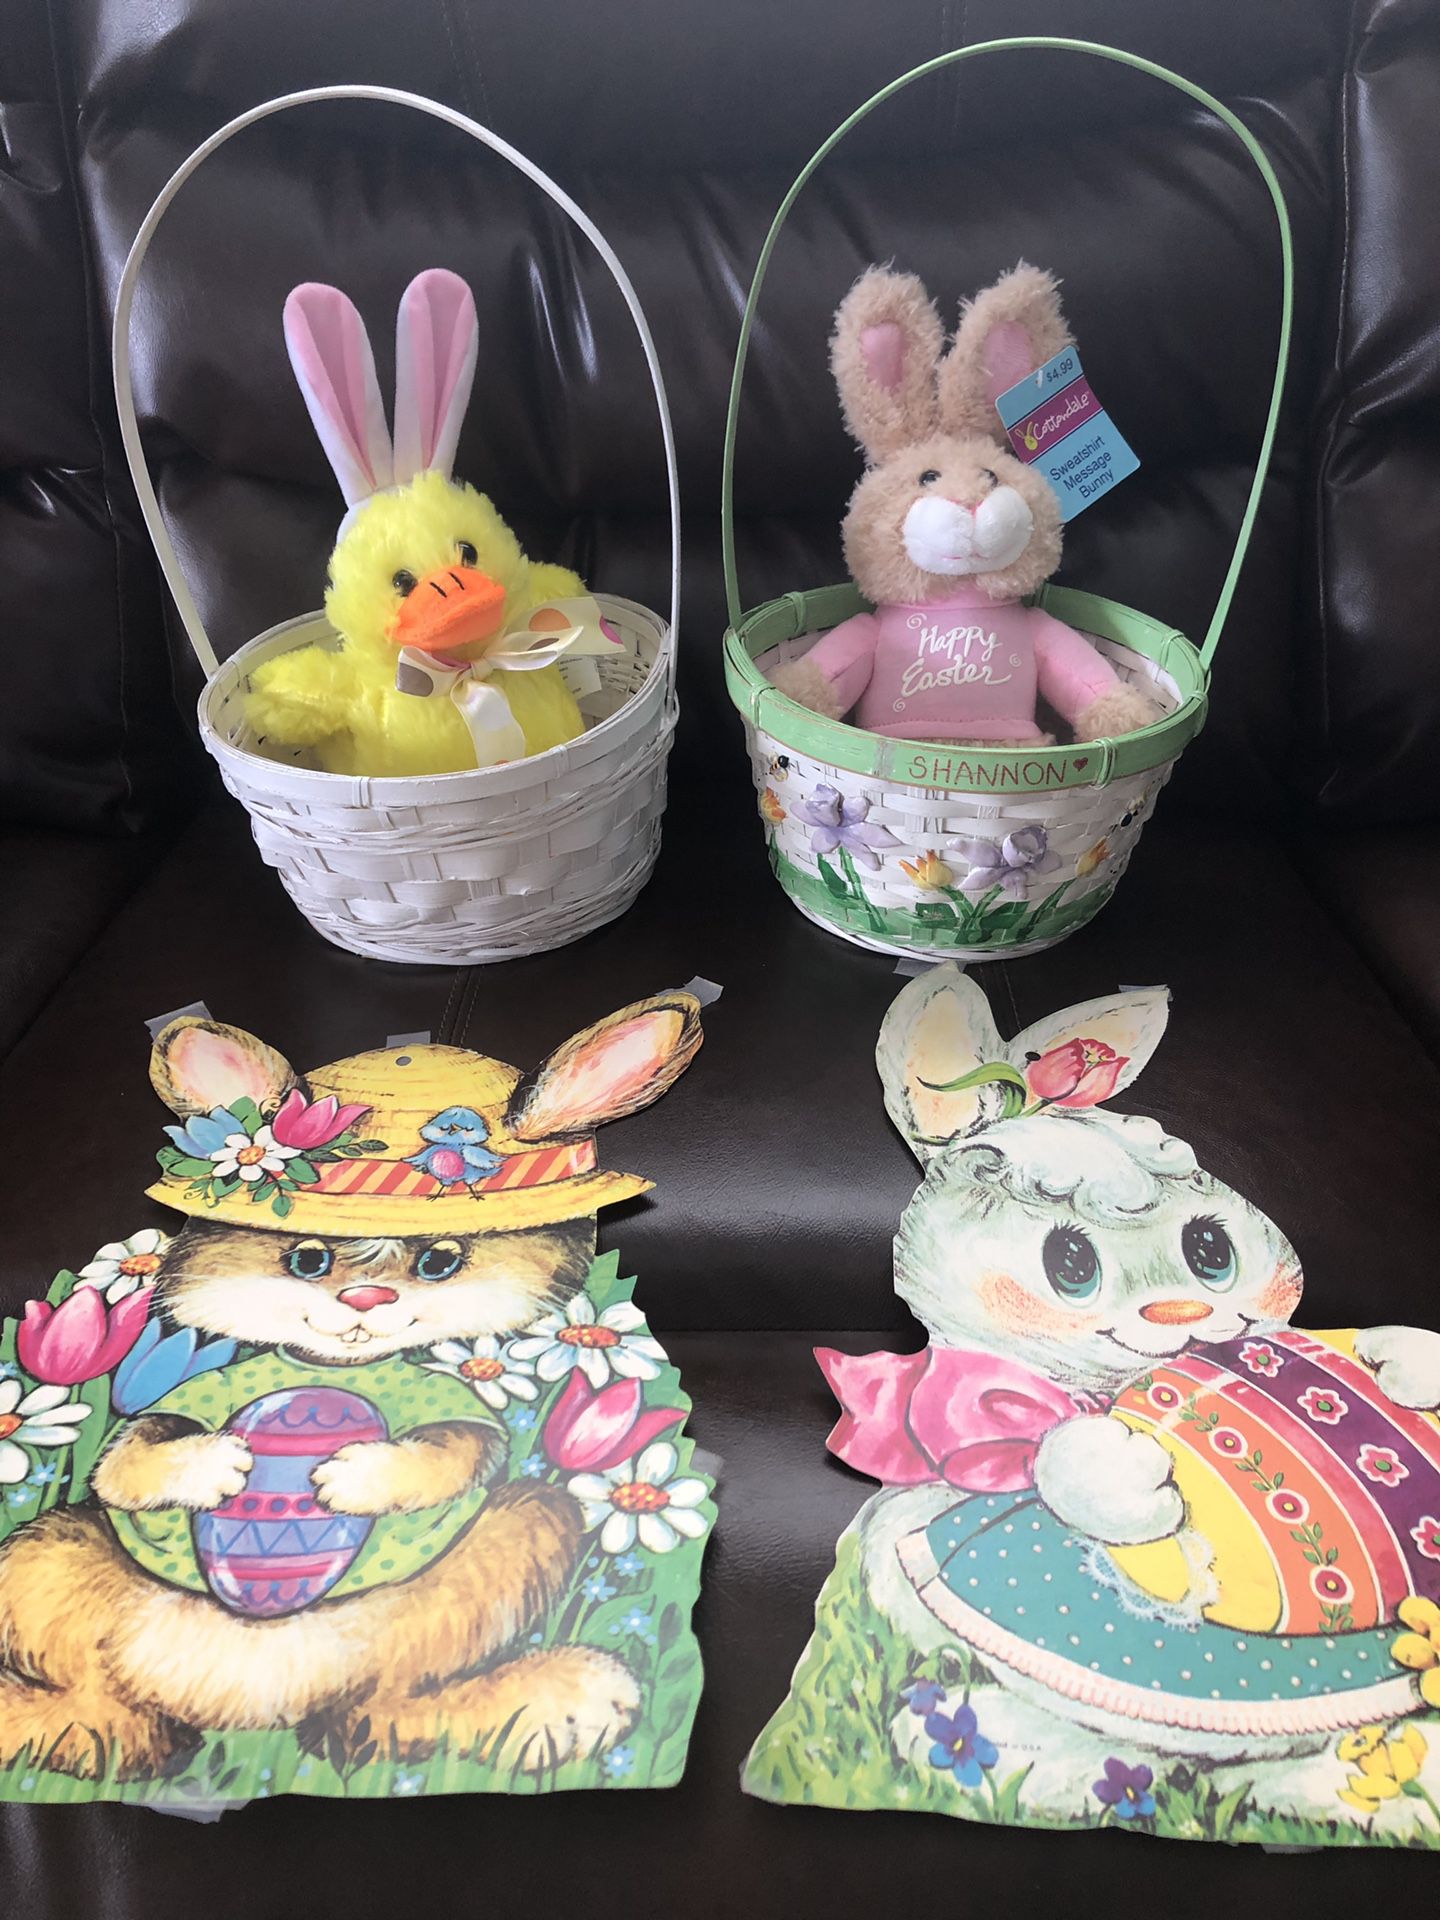 Easter baskets with toys and decorations, all for $ 10